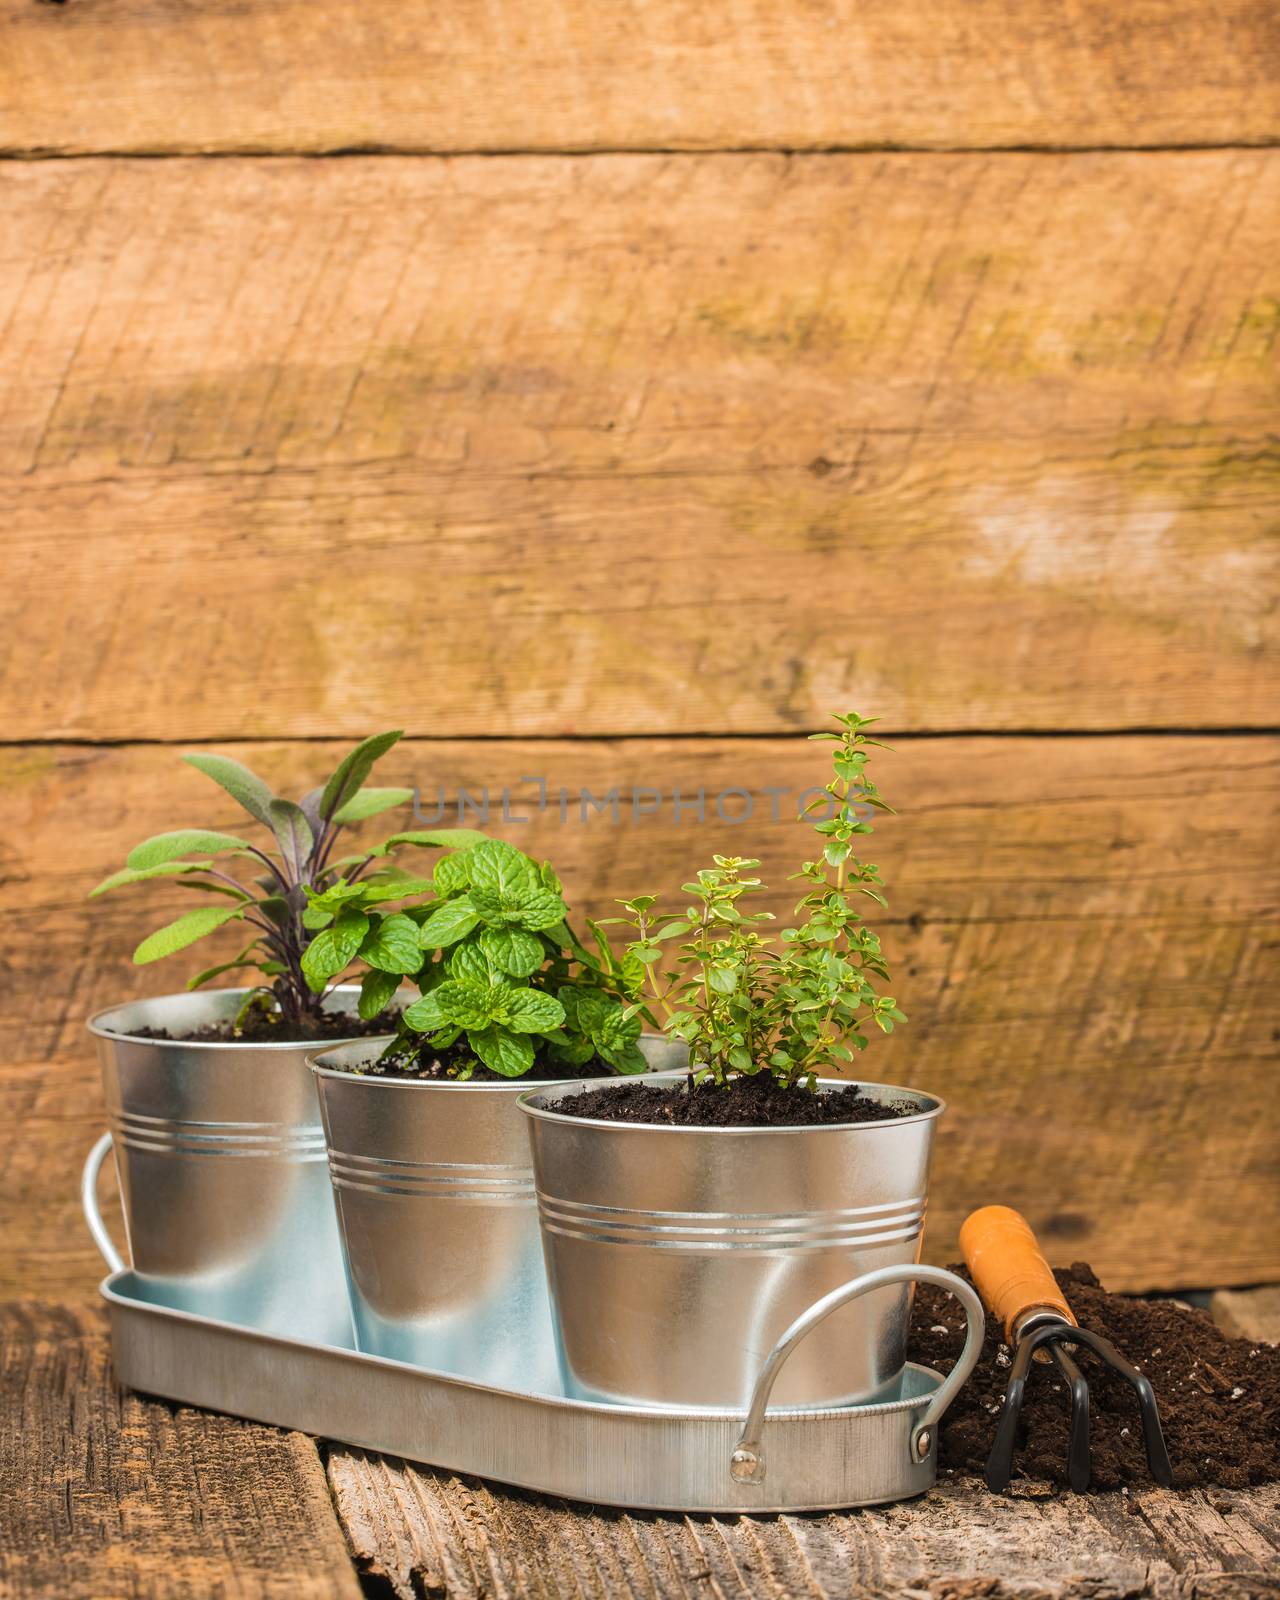 Small herbs in metal containers to create an indoor herb garden.